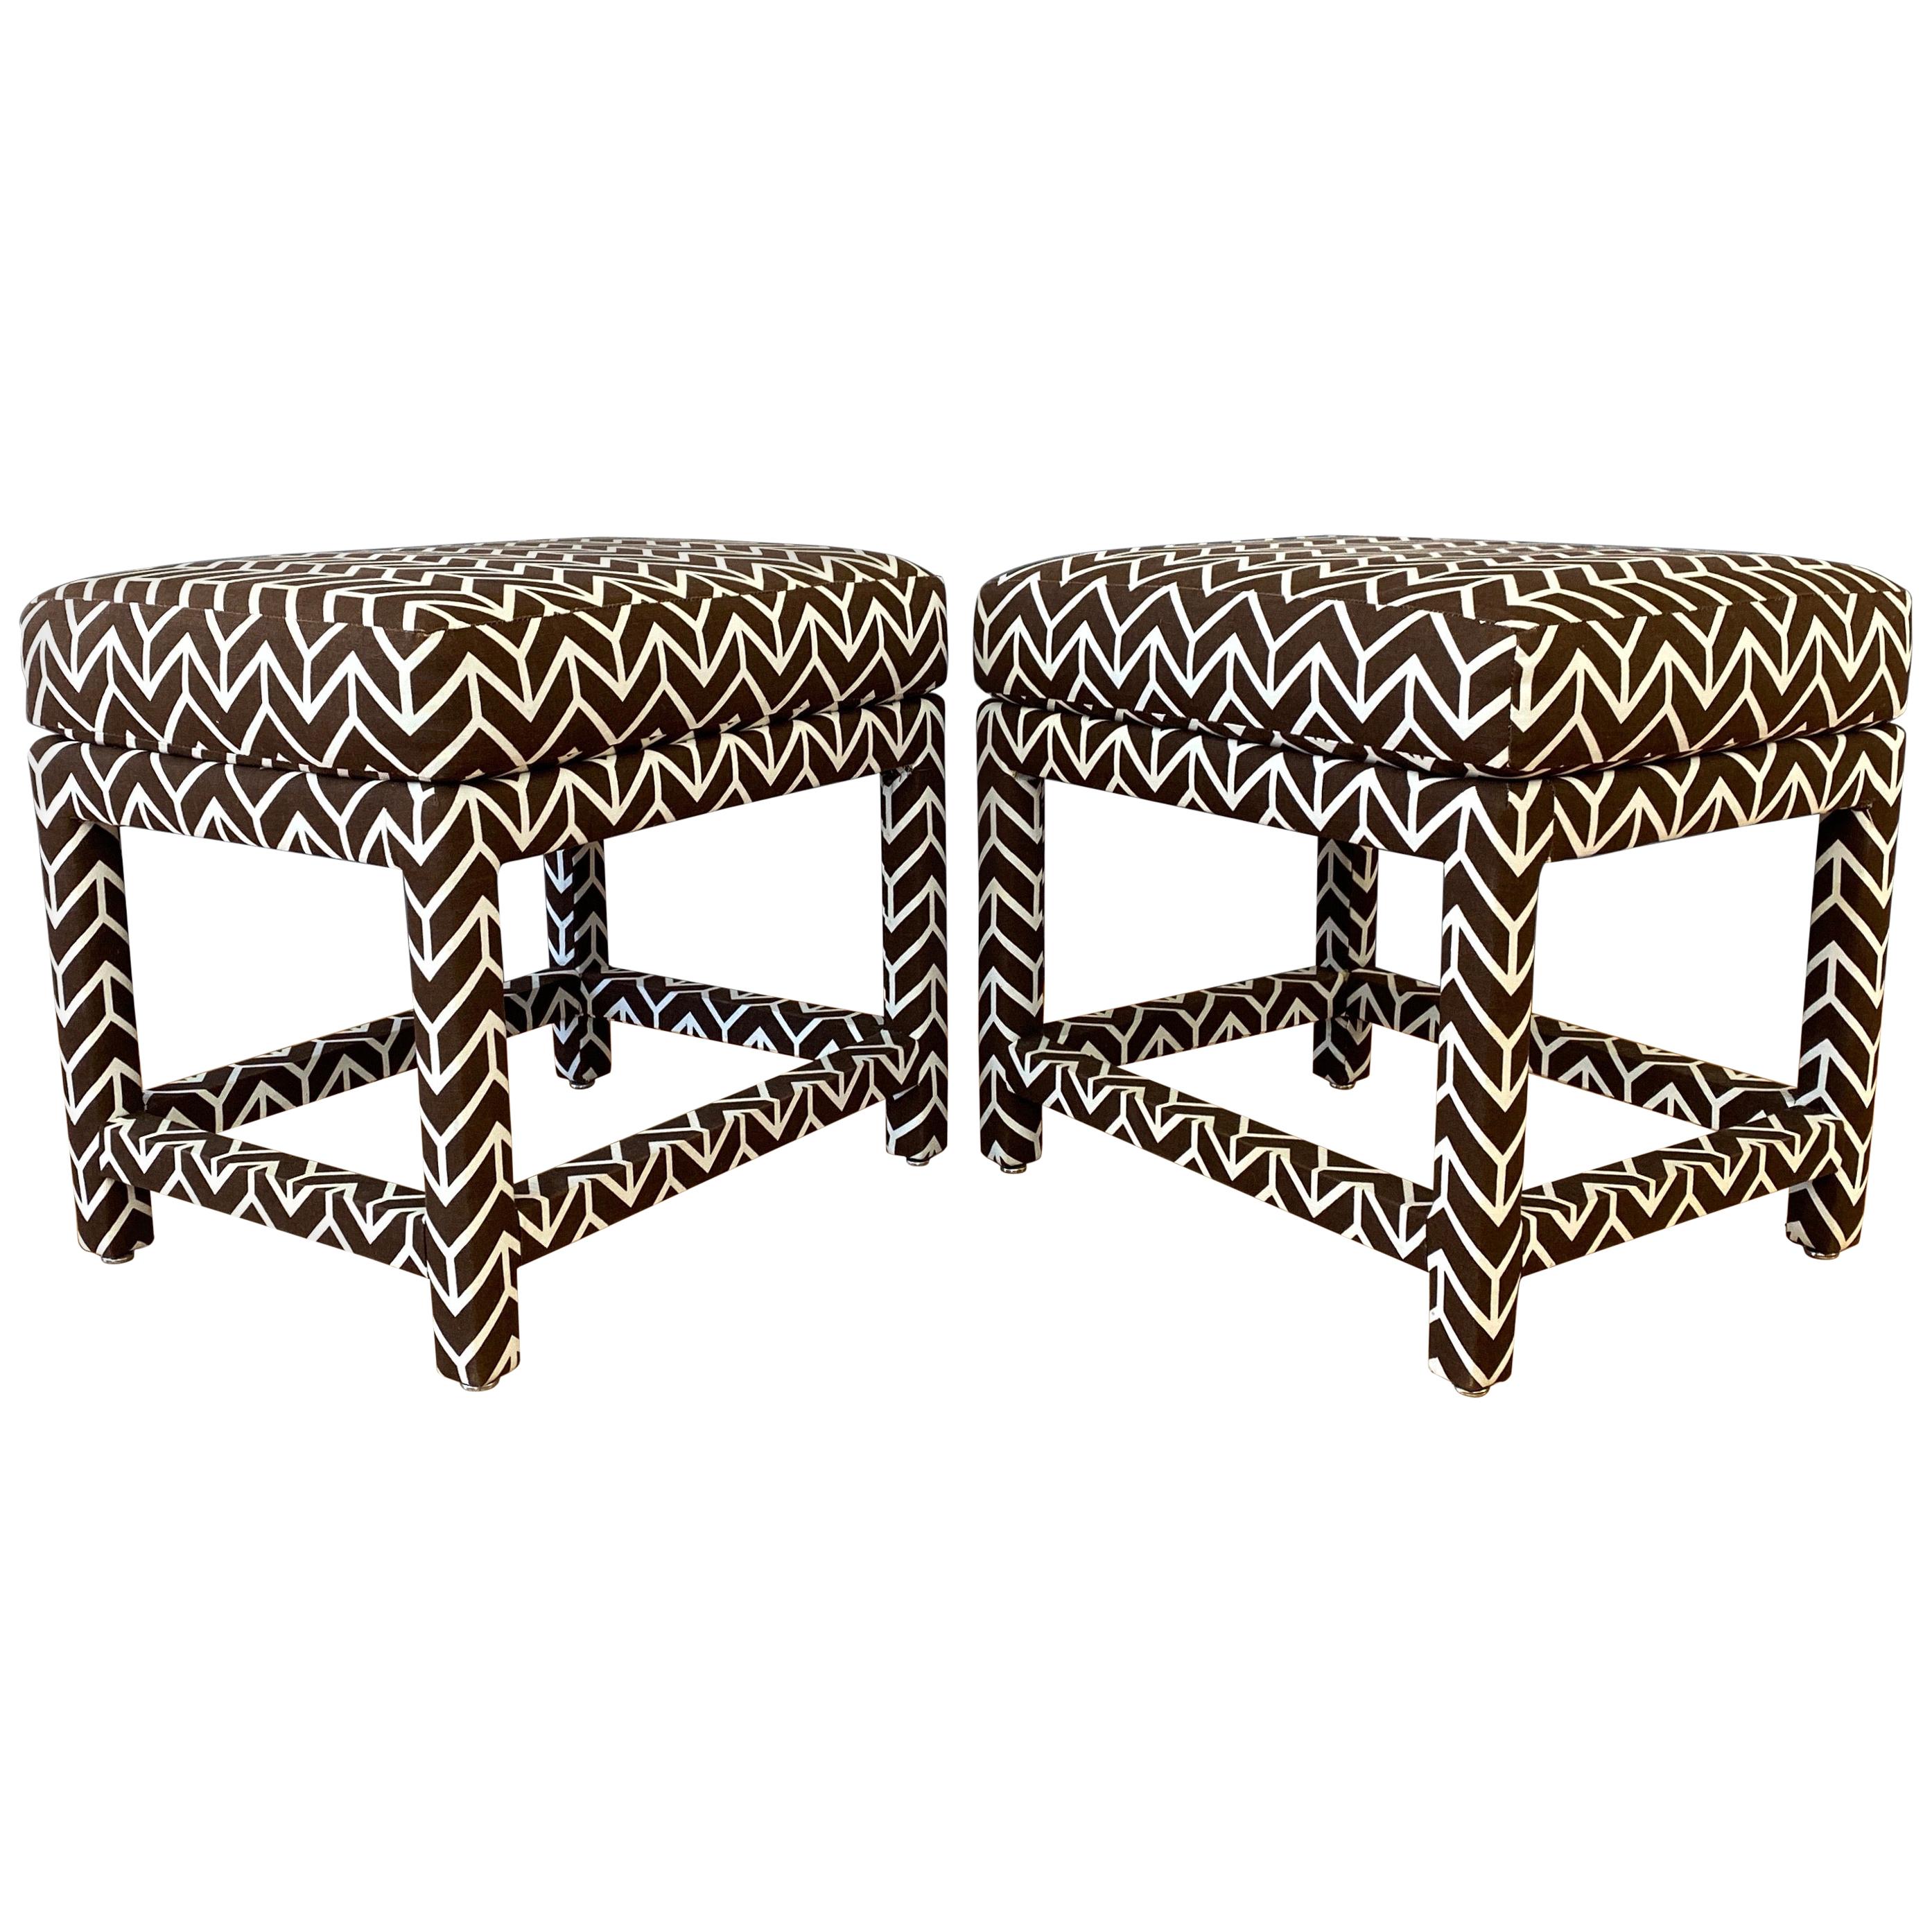 Pair of Milo Baughman for Thayer Coggin Ottomans with David Hicks Upholstery